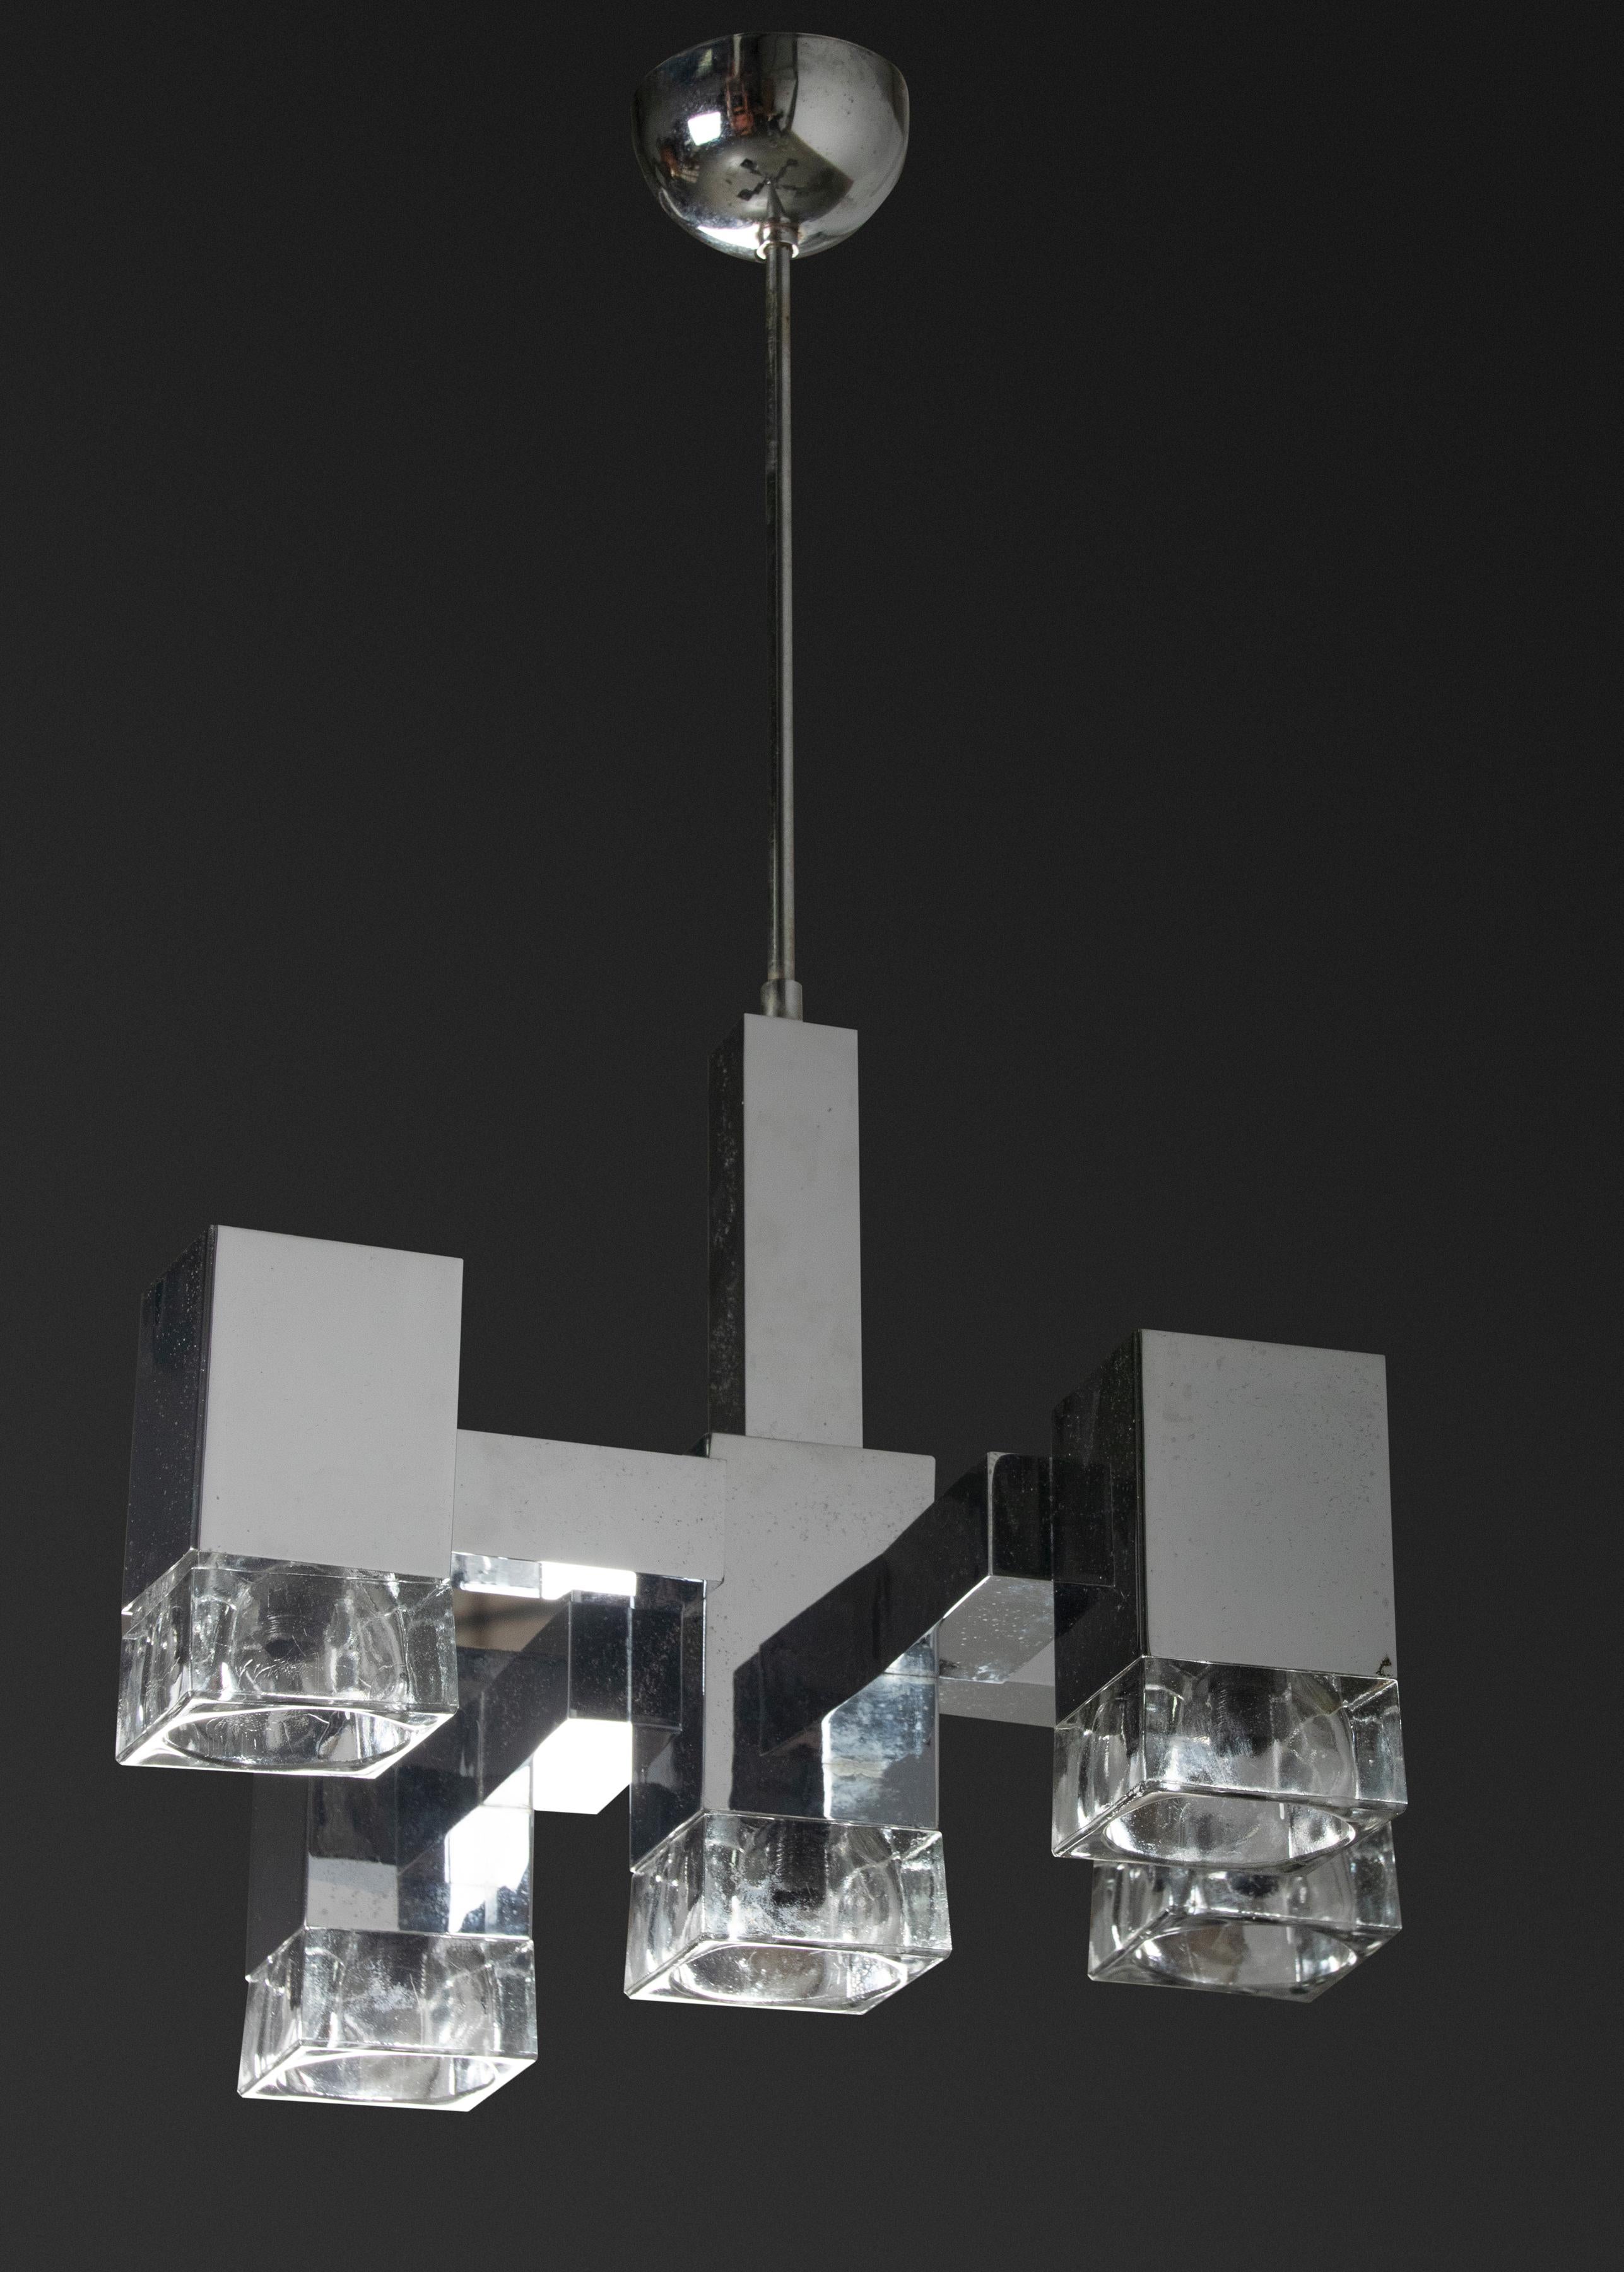 A sculptural Brutalist pendant light by Gaetano Sciolari, made in 1960-1970, Italy. Ice cubic shaped Murano glass shade. The geometric design is a variation of Sciolari's classic 